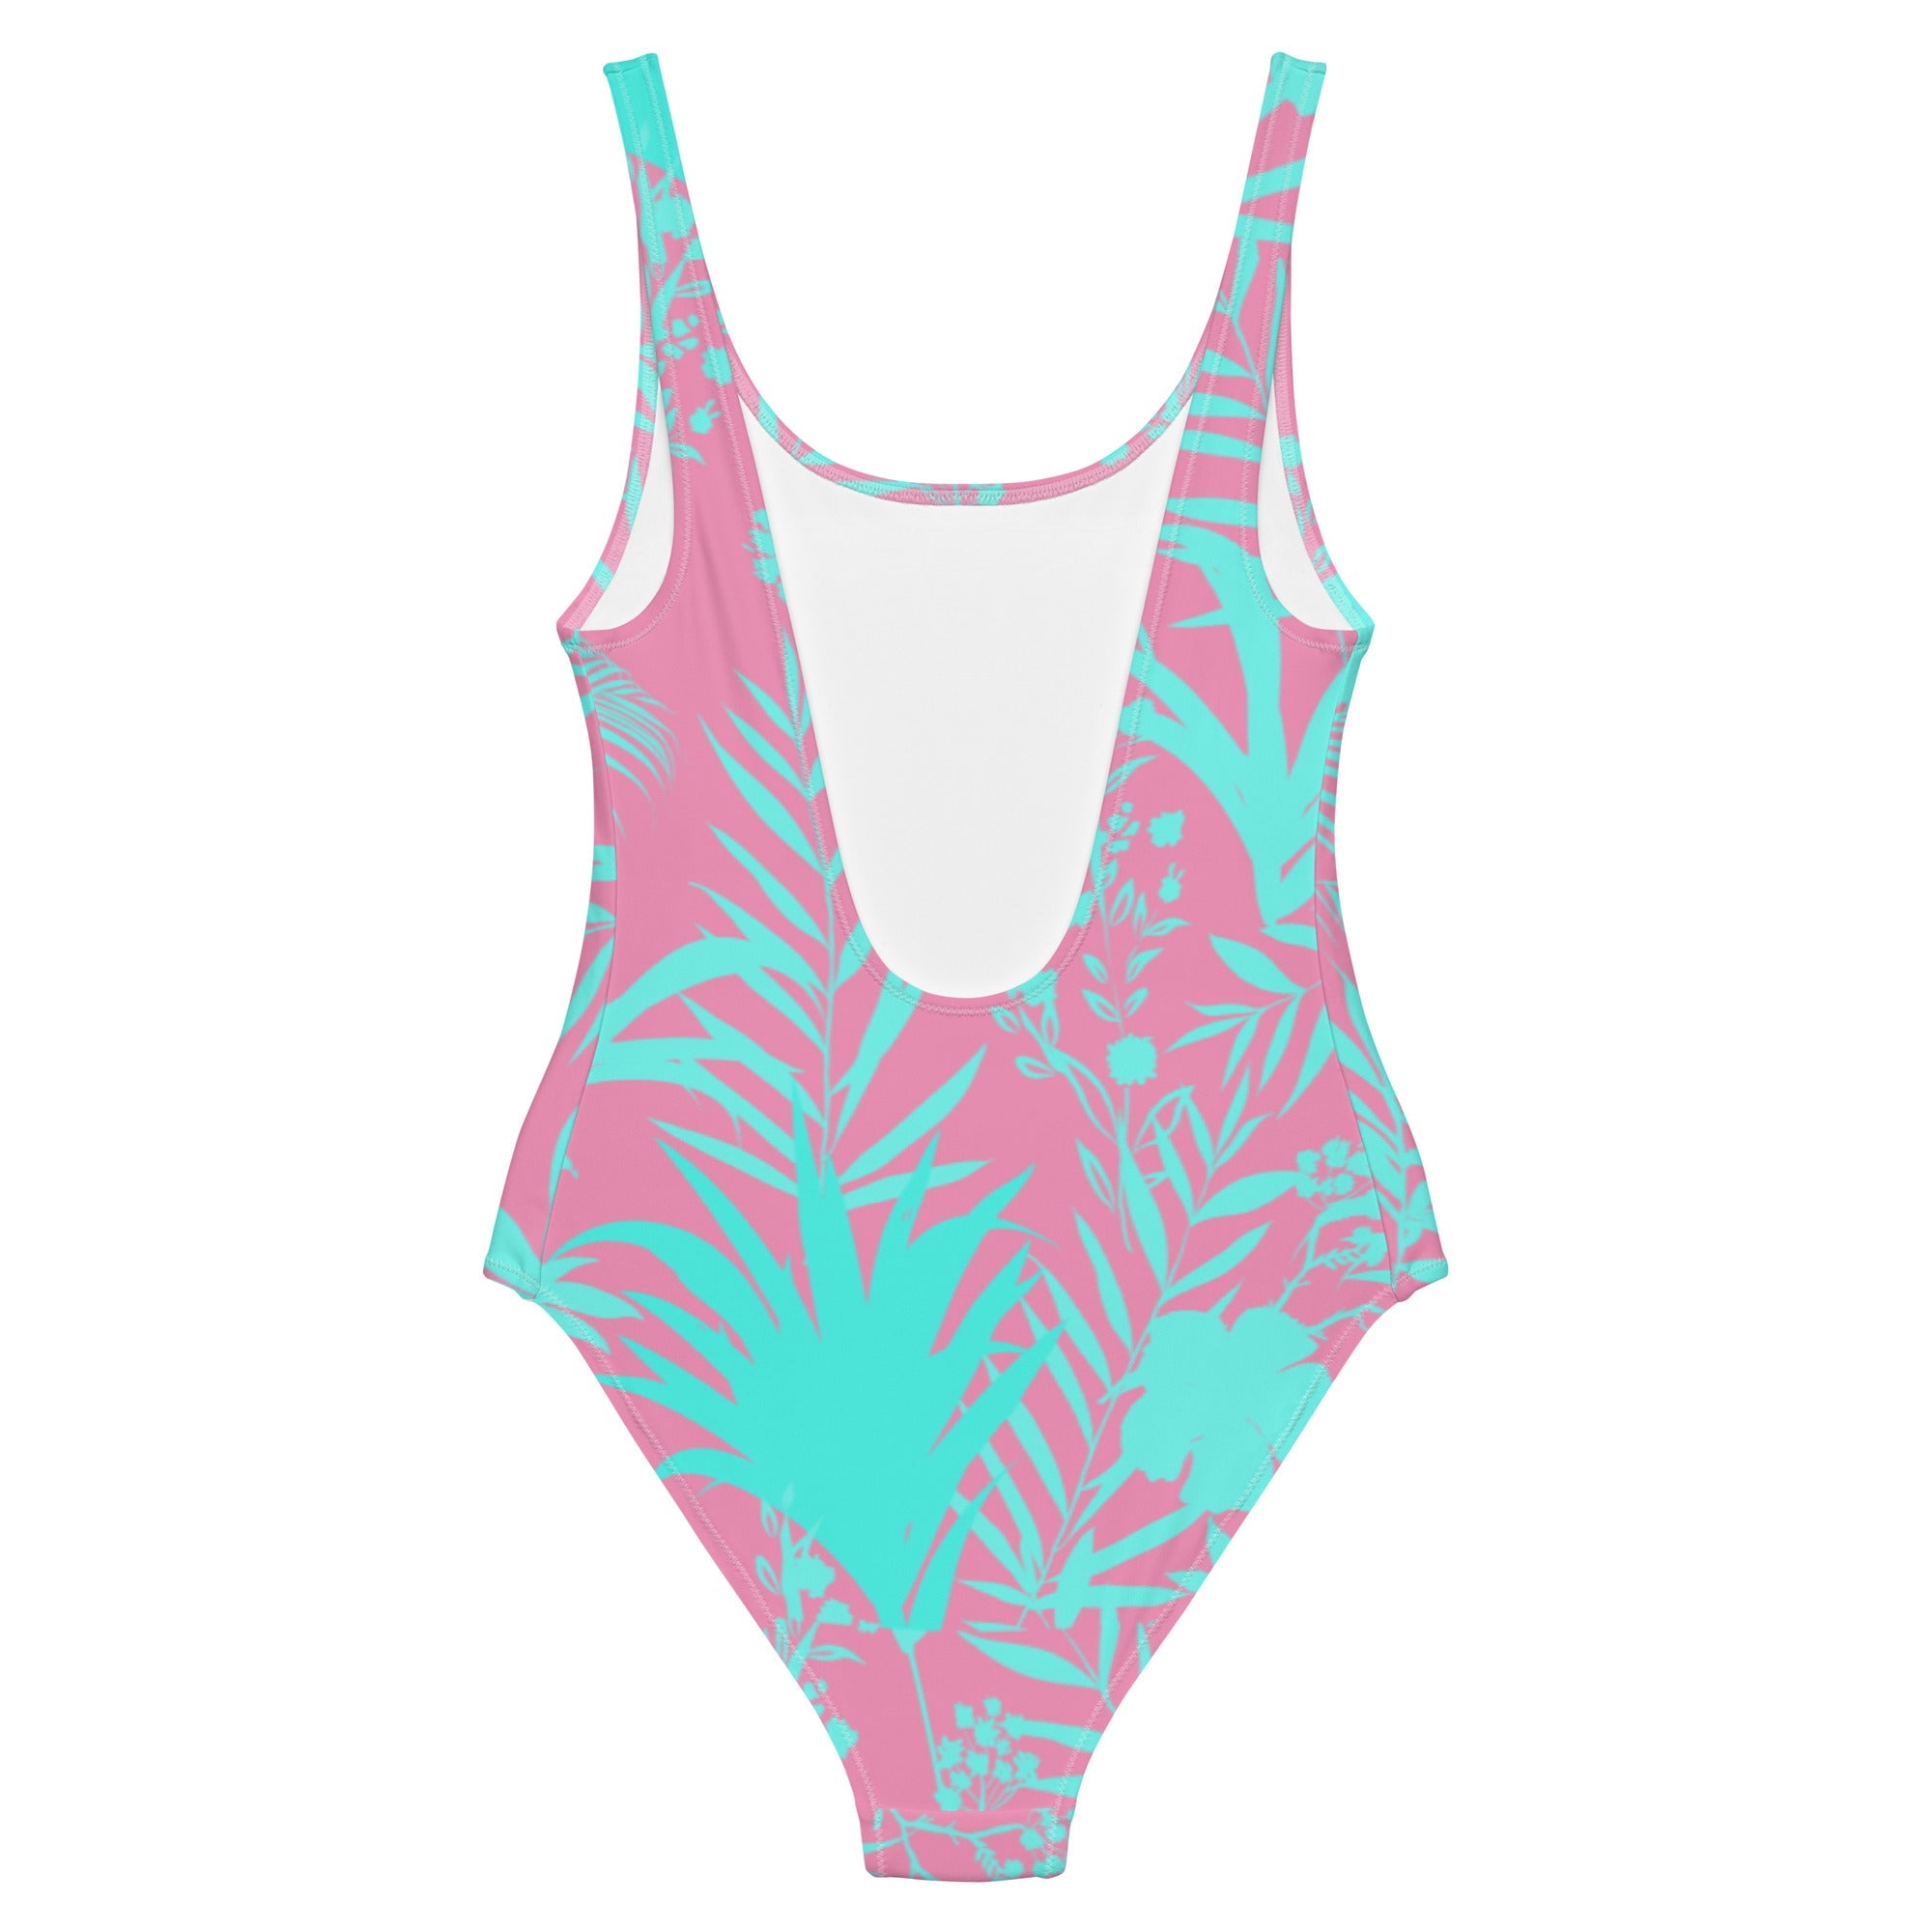 His Hers Couples Matching Swimwear Set, One-Piece Swimsuit + Swim Trunks,  Tropical Pink Sea Blue